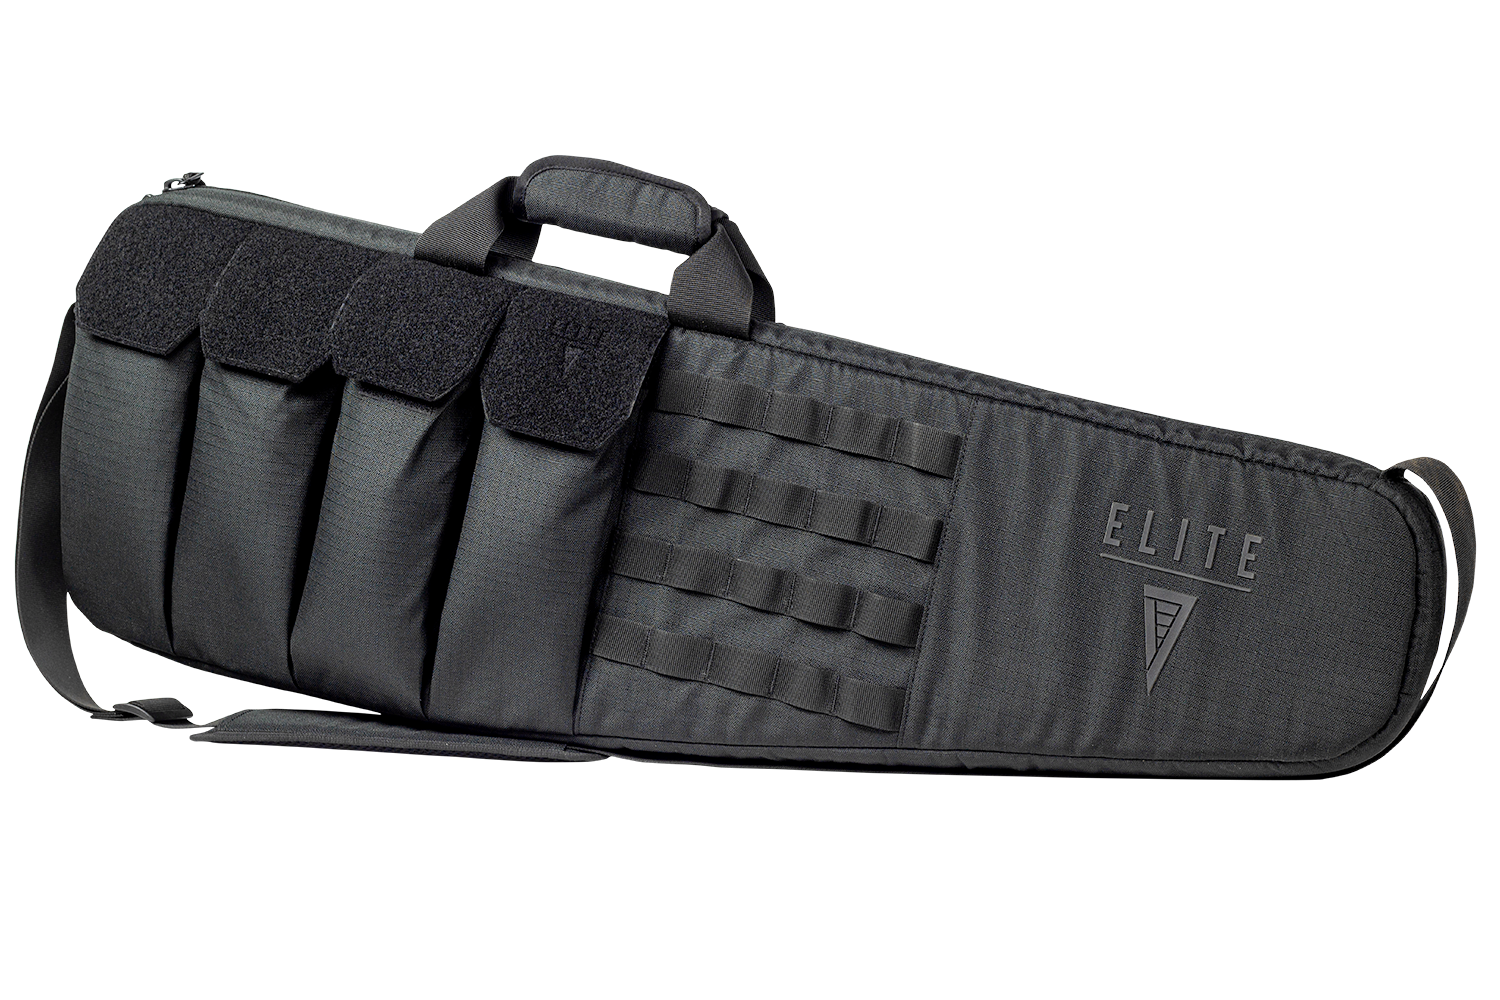 Elite Survival tactical sporting rifle case with MOLLE compatibility and exterior mag pouches. Includes a built-in magazine pouch.